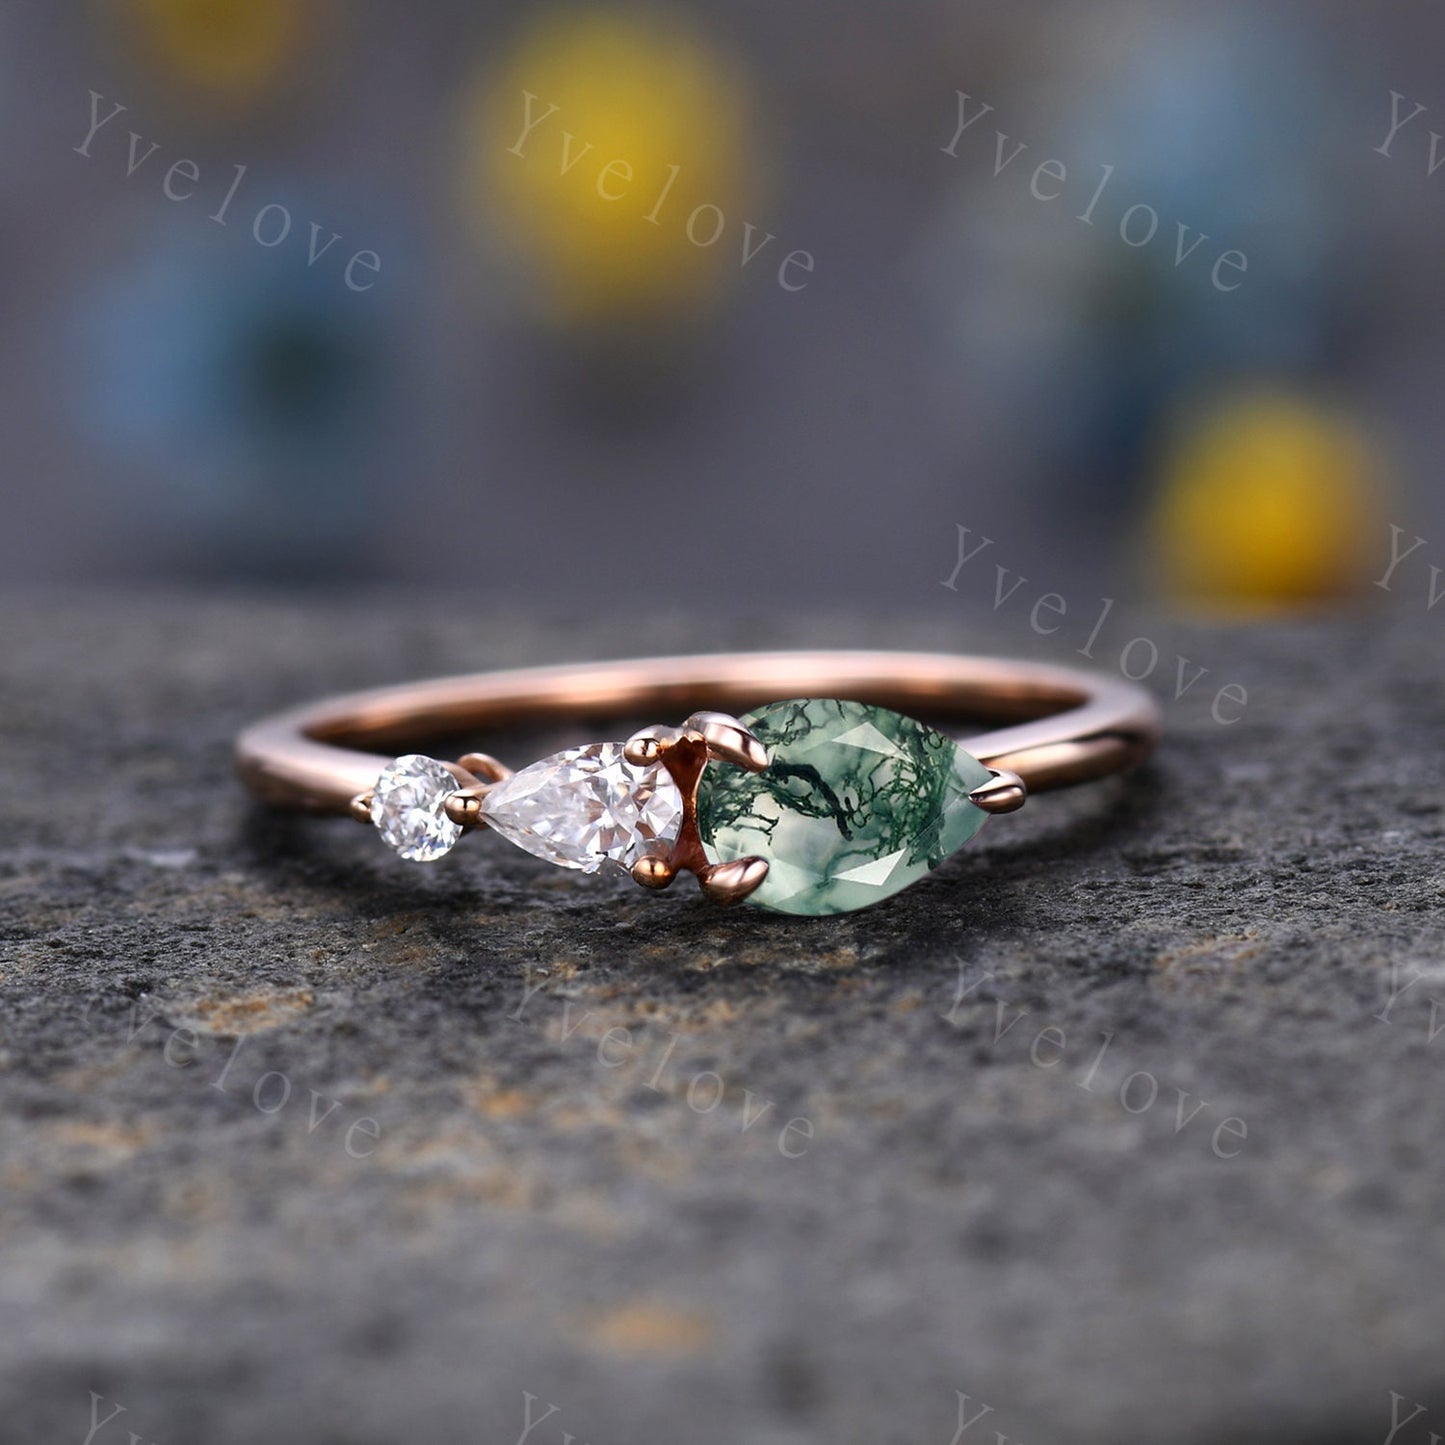 Vintage Moss Agate Ring Engagement Ring,Pear Cut Gems,Art Deco Moissanite Wedding Band,3 Stone Unique Women Bridal Promise Ring,White gold